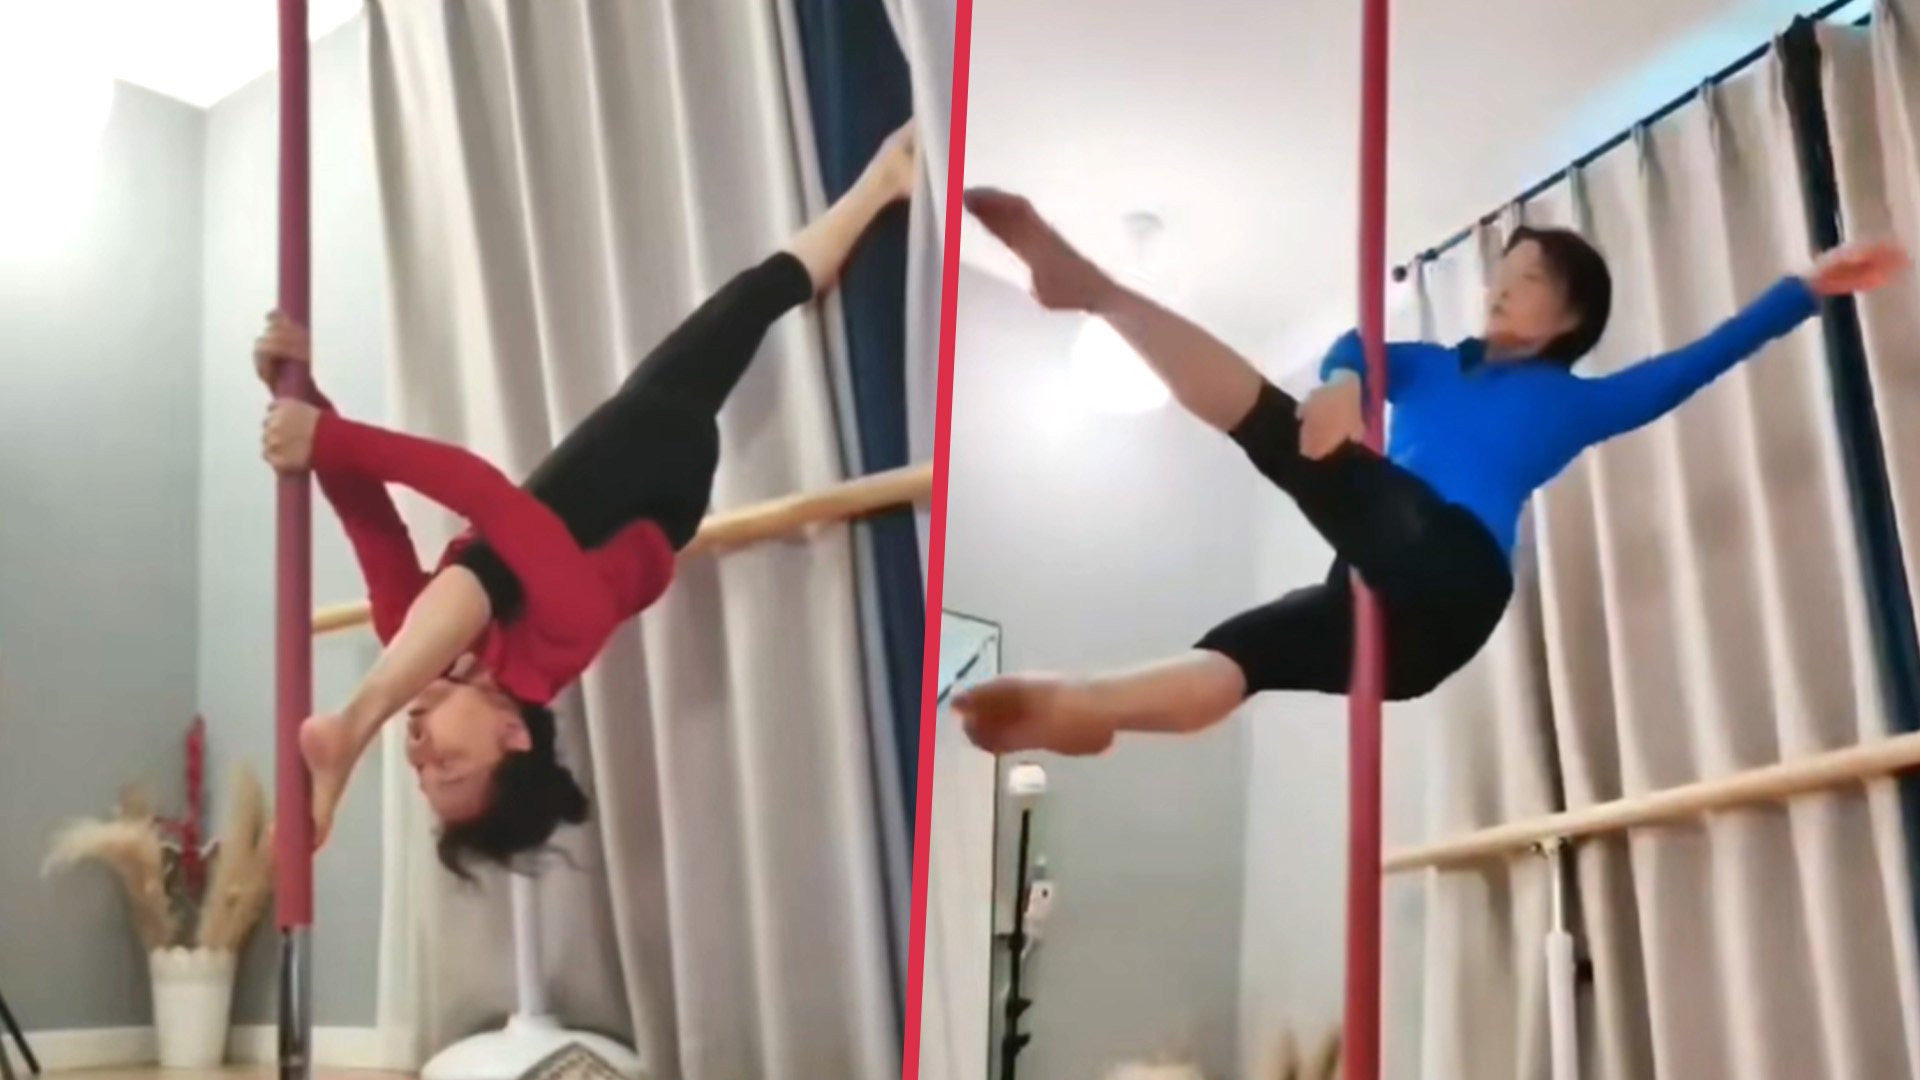 A 78-year-old woman in China has fallen in love with pole dancing following her retirement, becoming a high profile television personality along the way. Photo: SCMP composite/Douyin